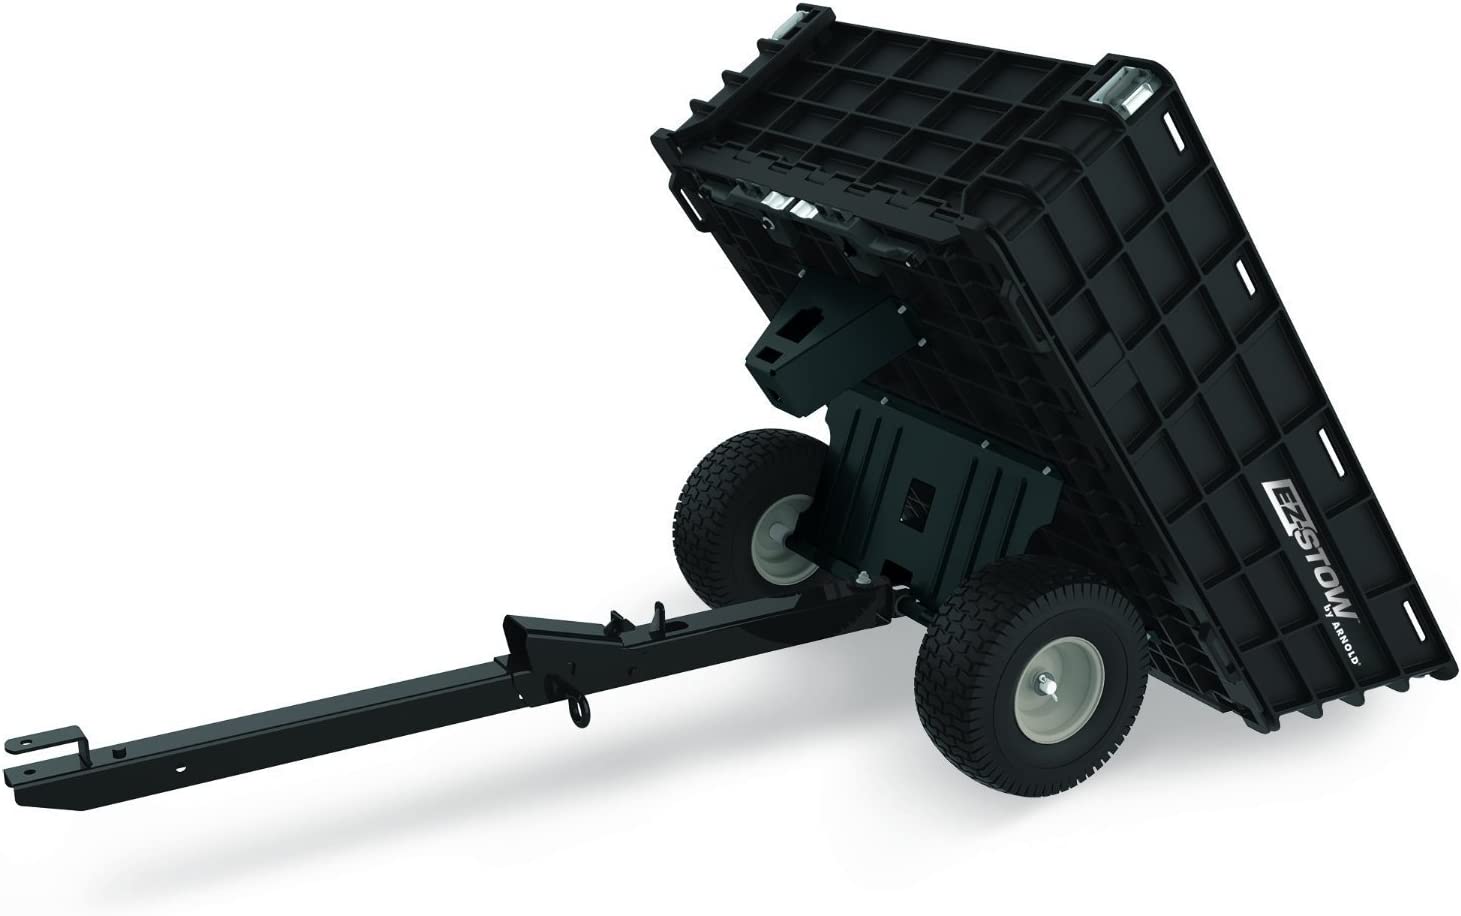 Arnold EZ tow behind cart review